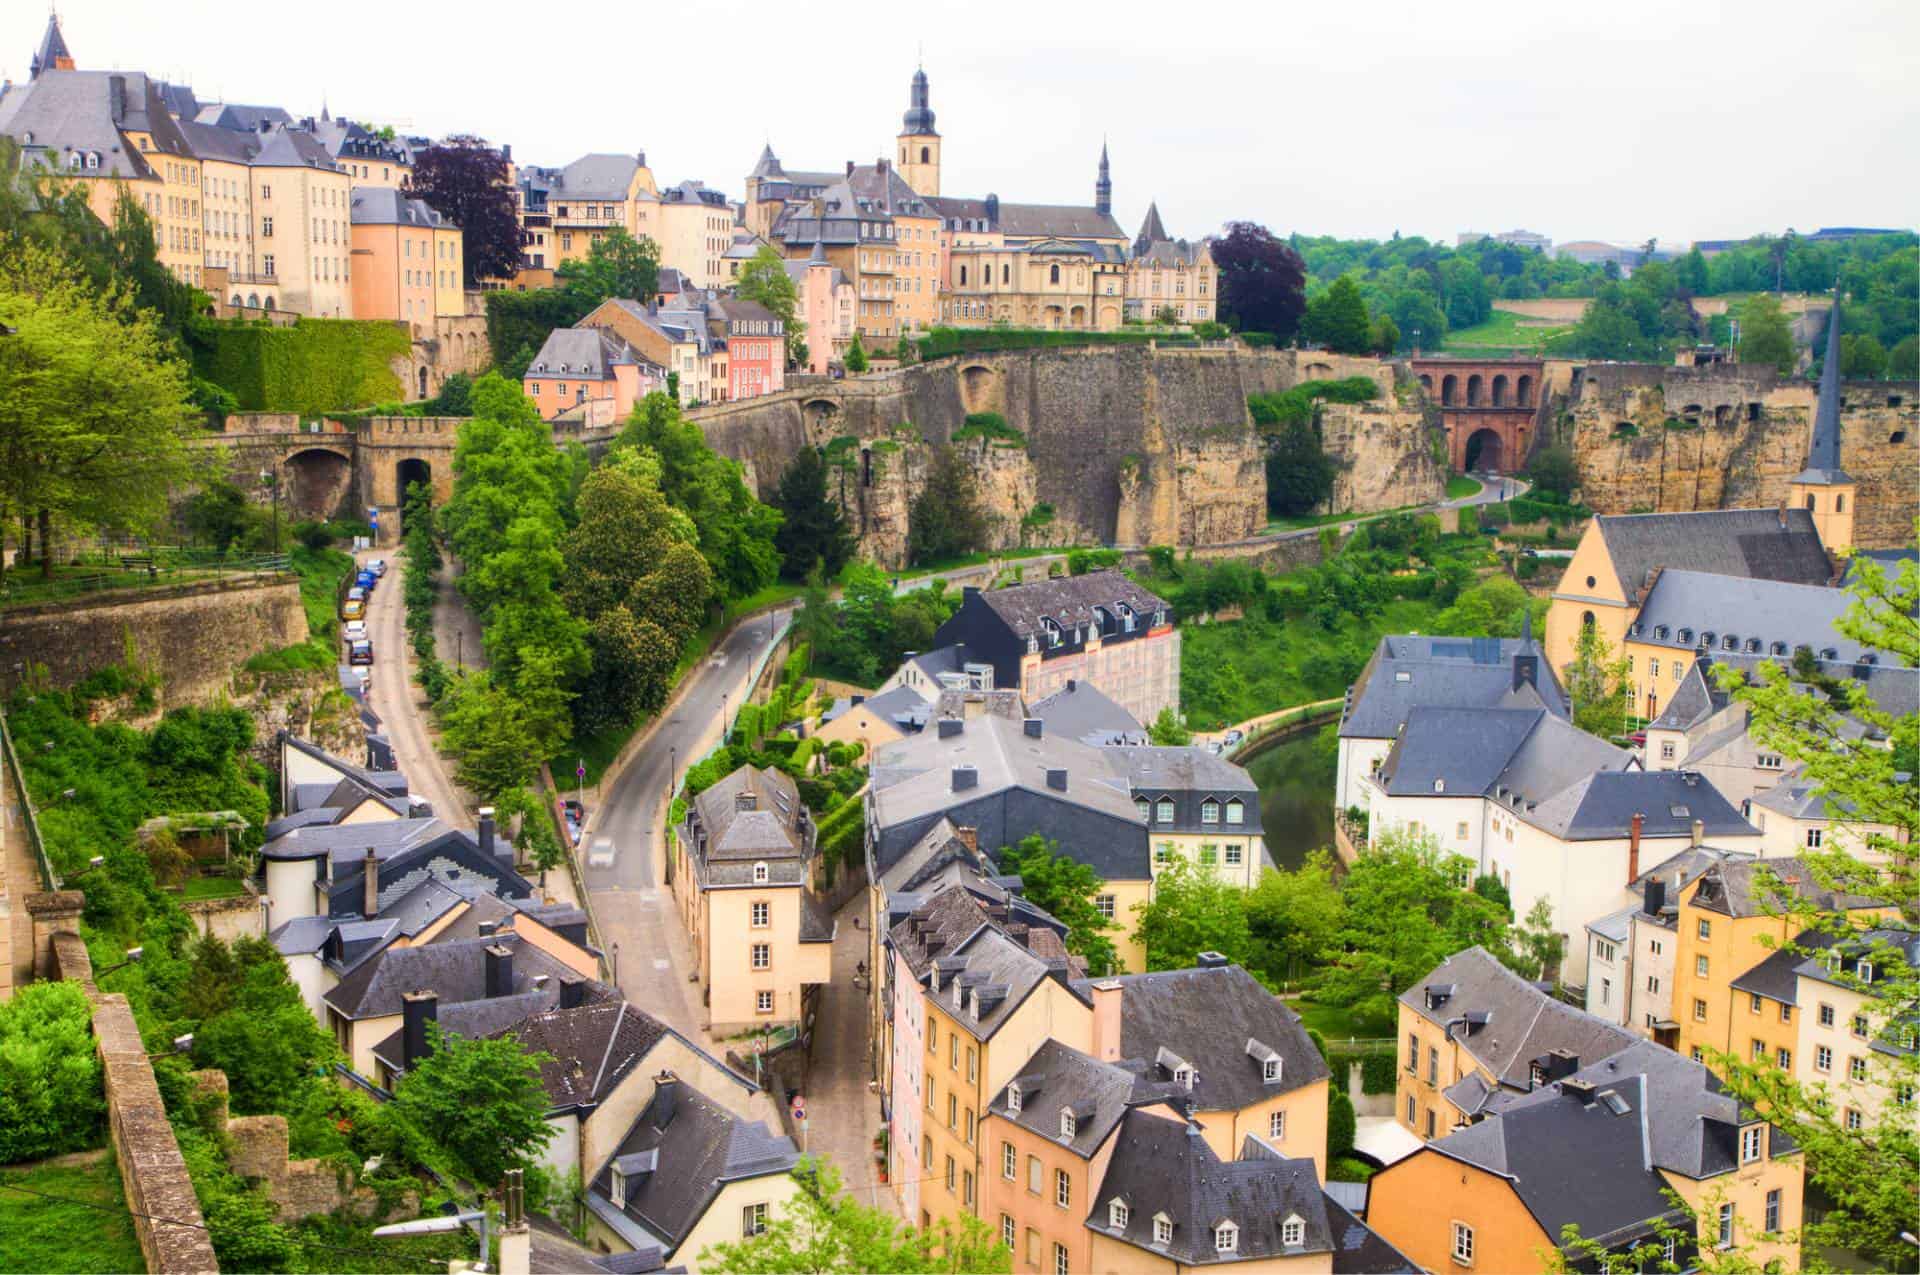 Amazing view of Luxembourg City, capital of Luxembourg, one of the richest countries in Europe.